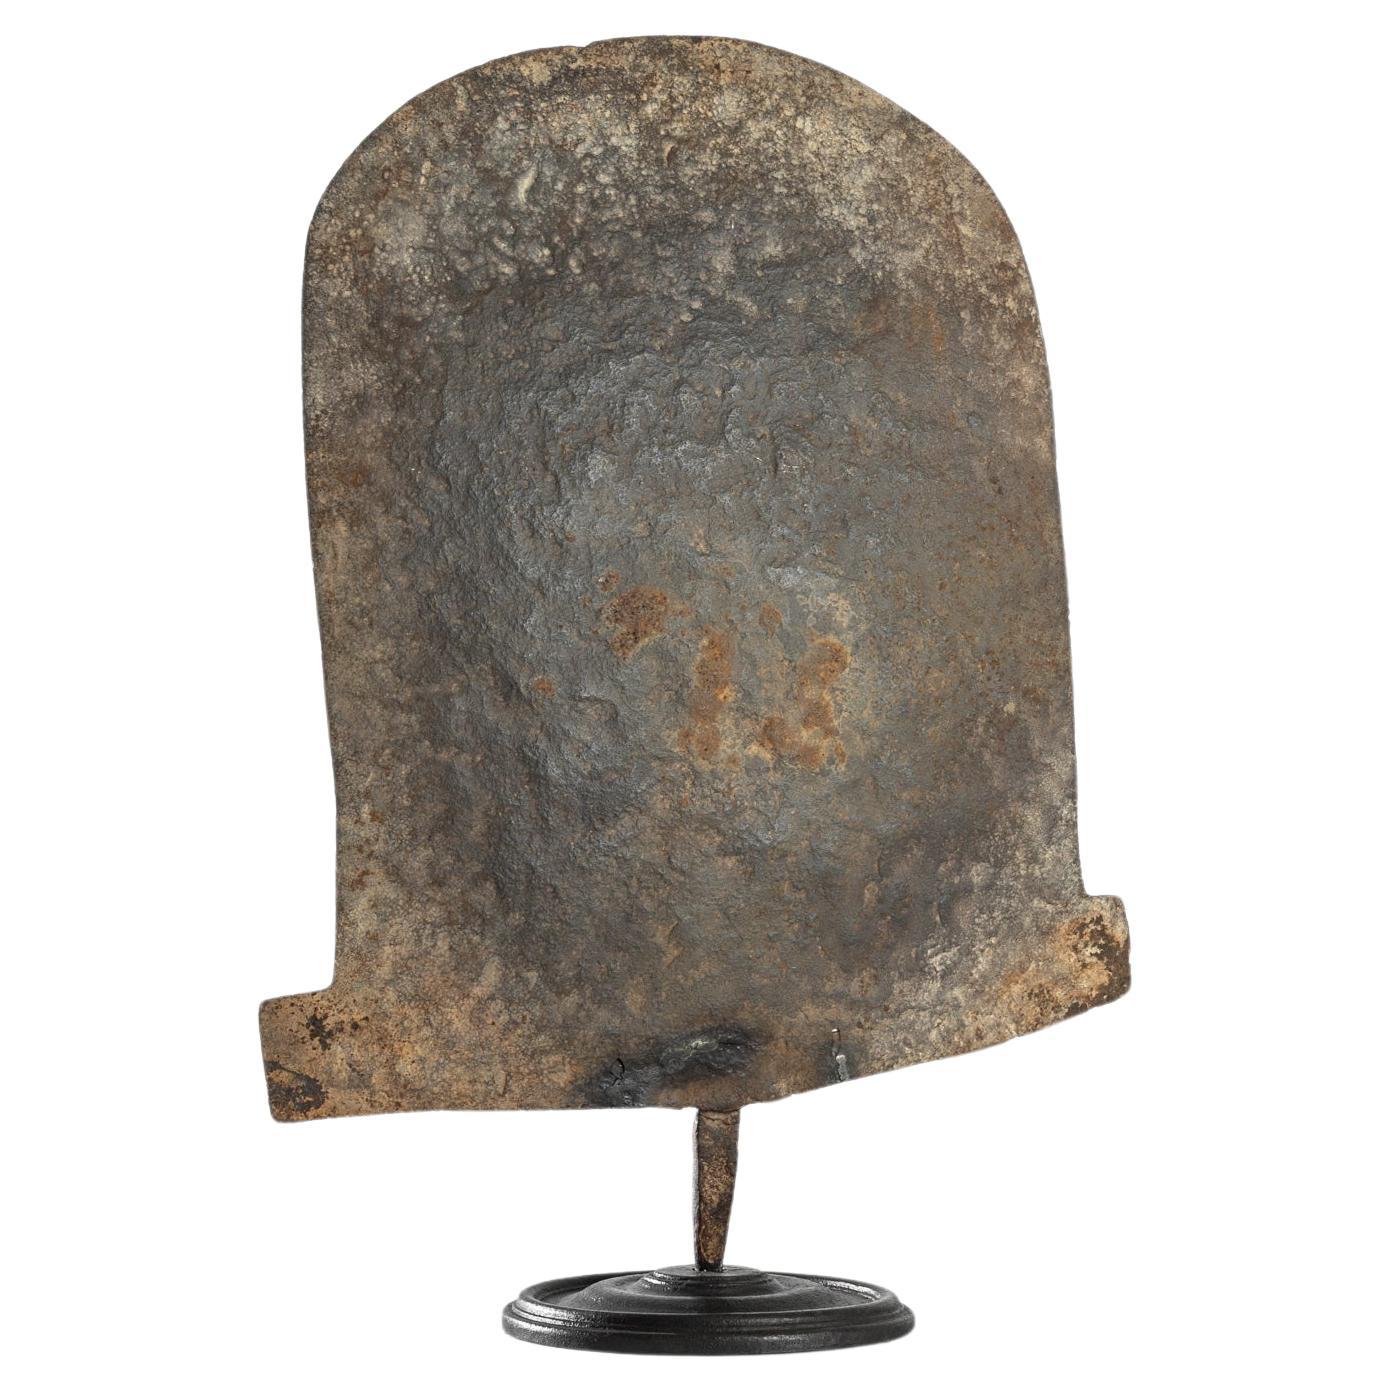 20th Century African Shovel Currency on Stand For Sale